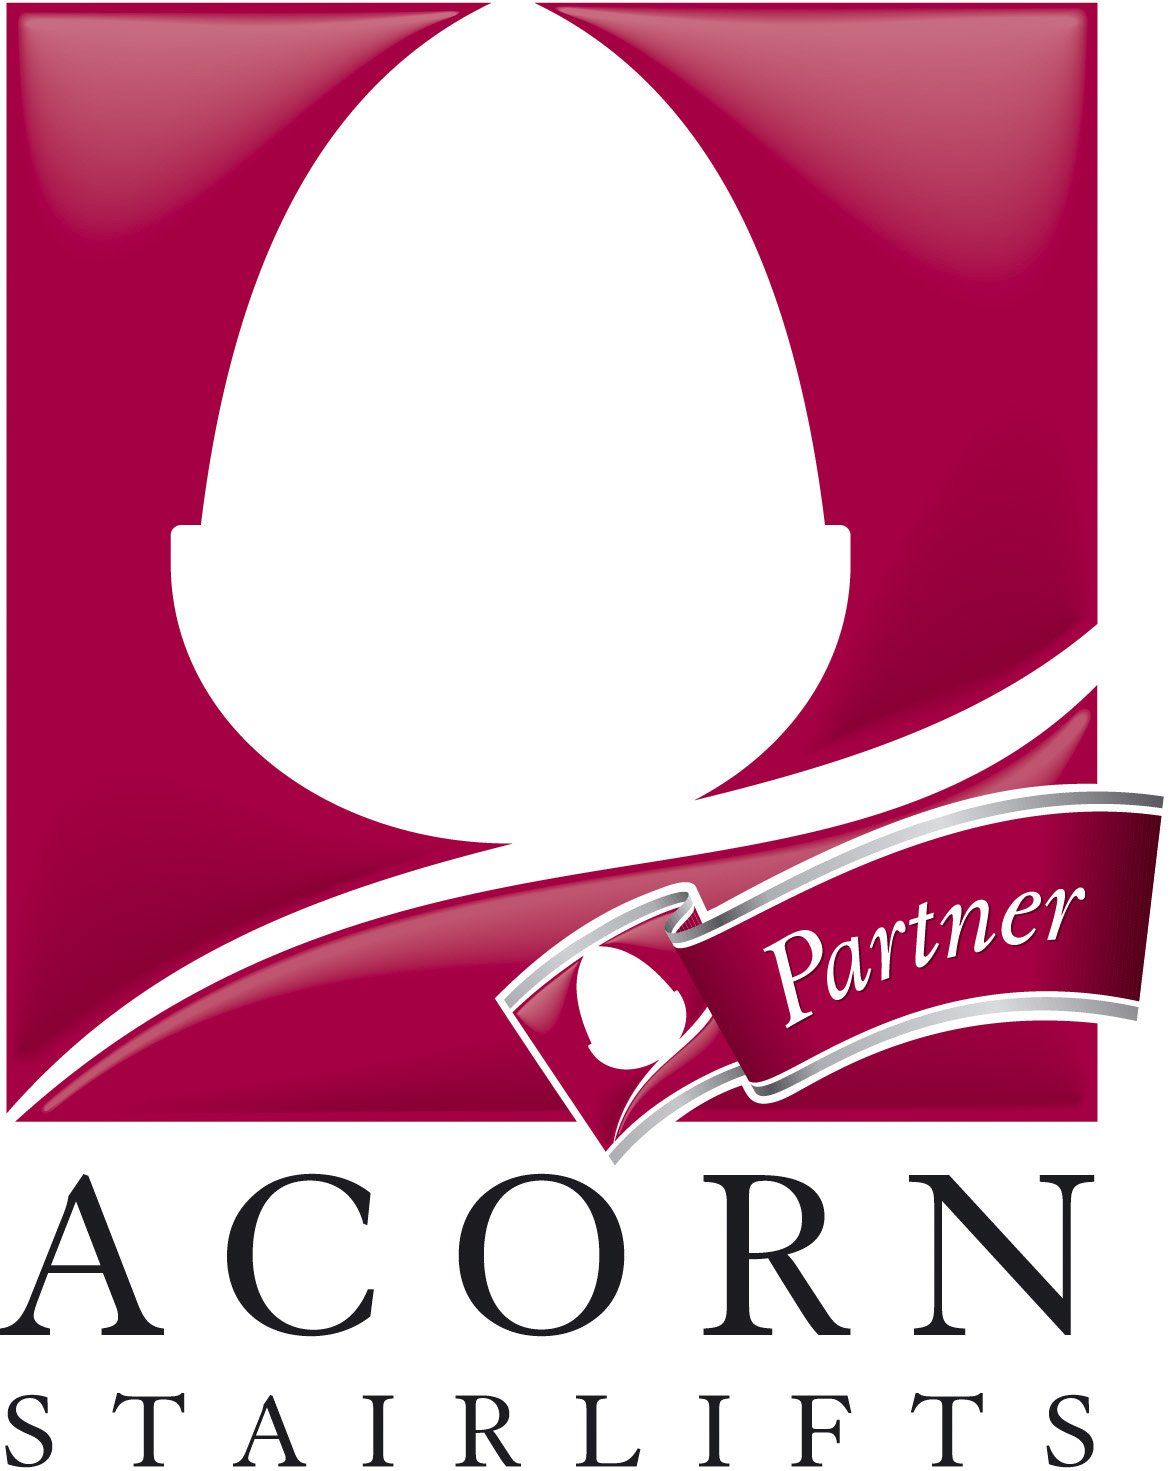 Acorn Stairlifts Partner - Helping Hand Stairlifts